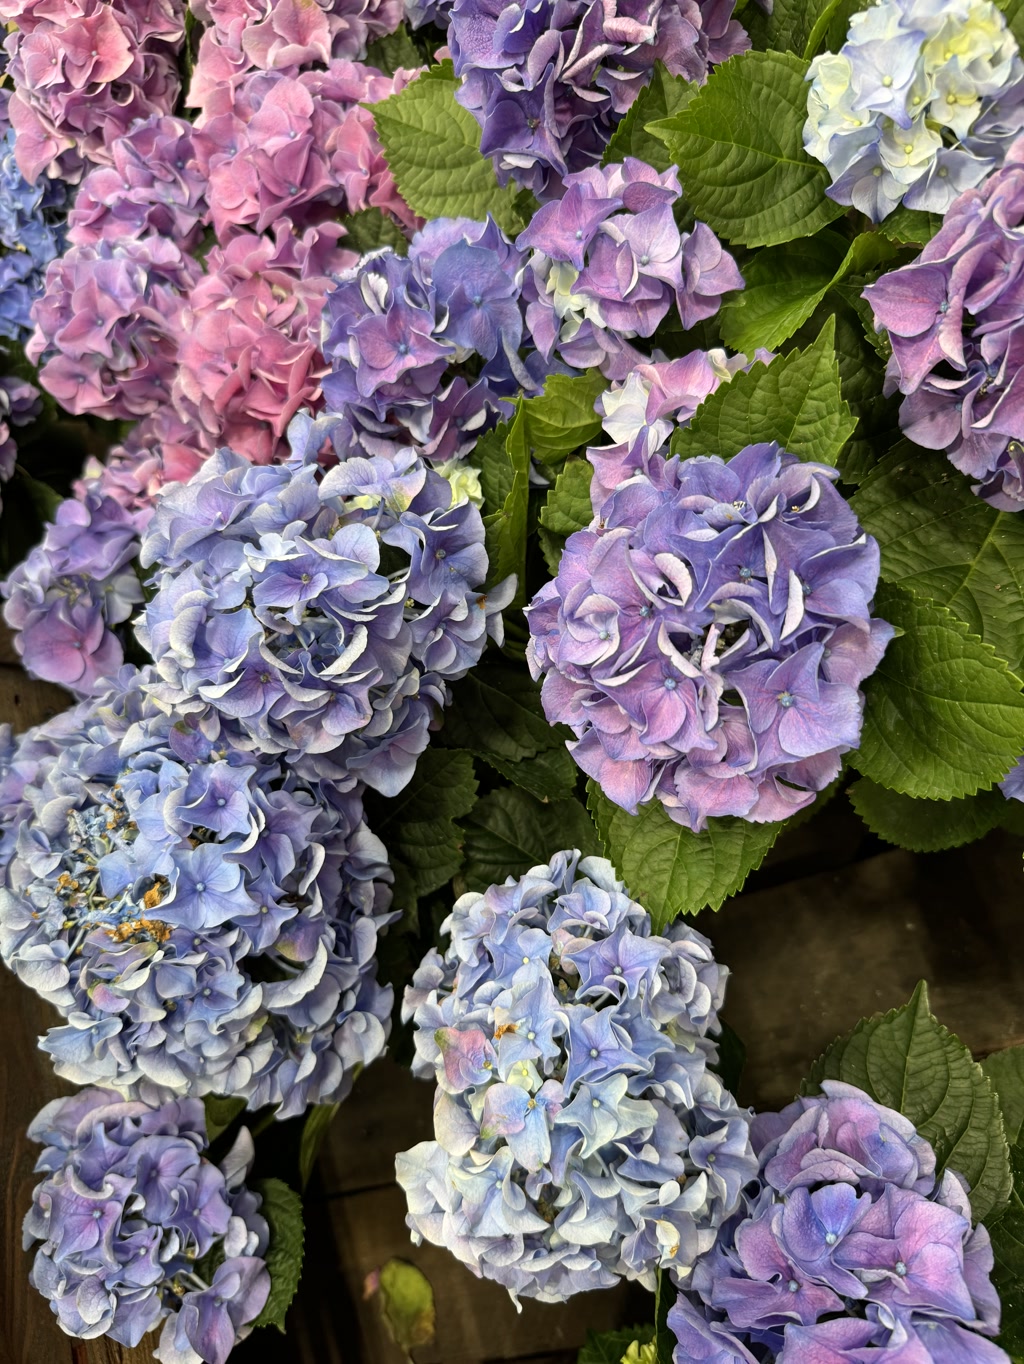 A vibrant collection of hydrangea flowers showcasing a range of colors including shades of blue, purple, and light blue, with a hint of pale yellow-green in some petals. The abundant blooms are displayed among large green leaves with a luscious, leathery texture.